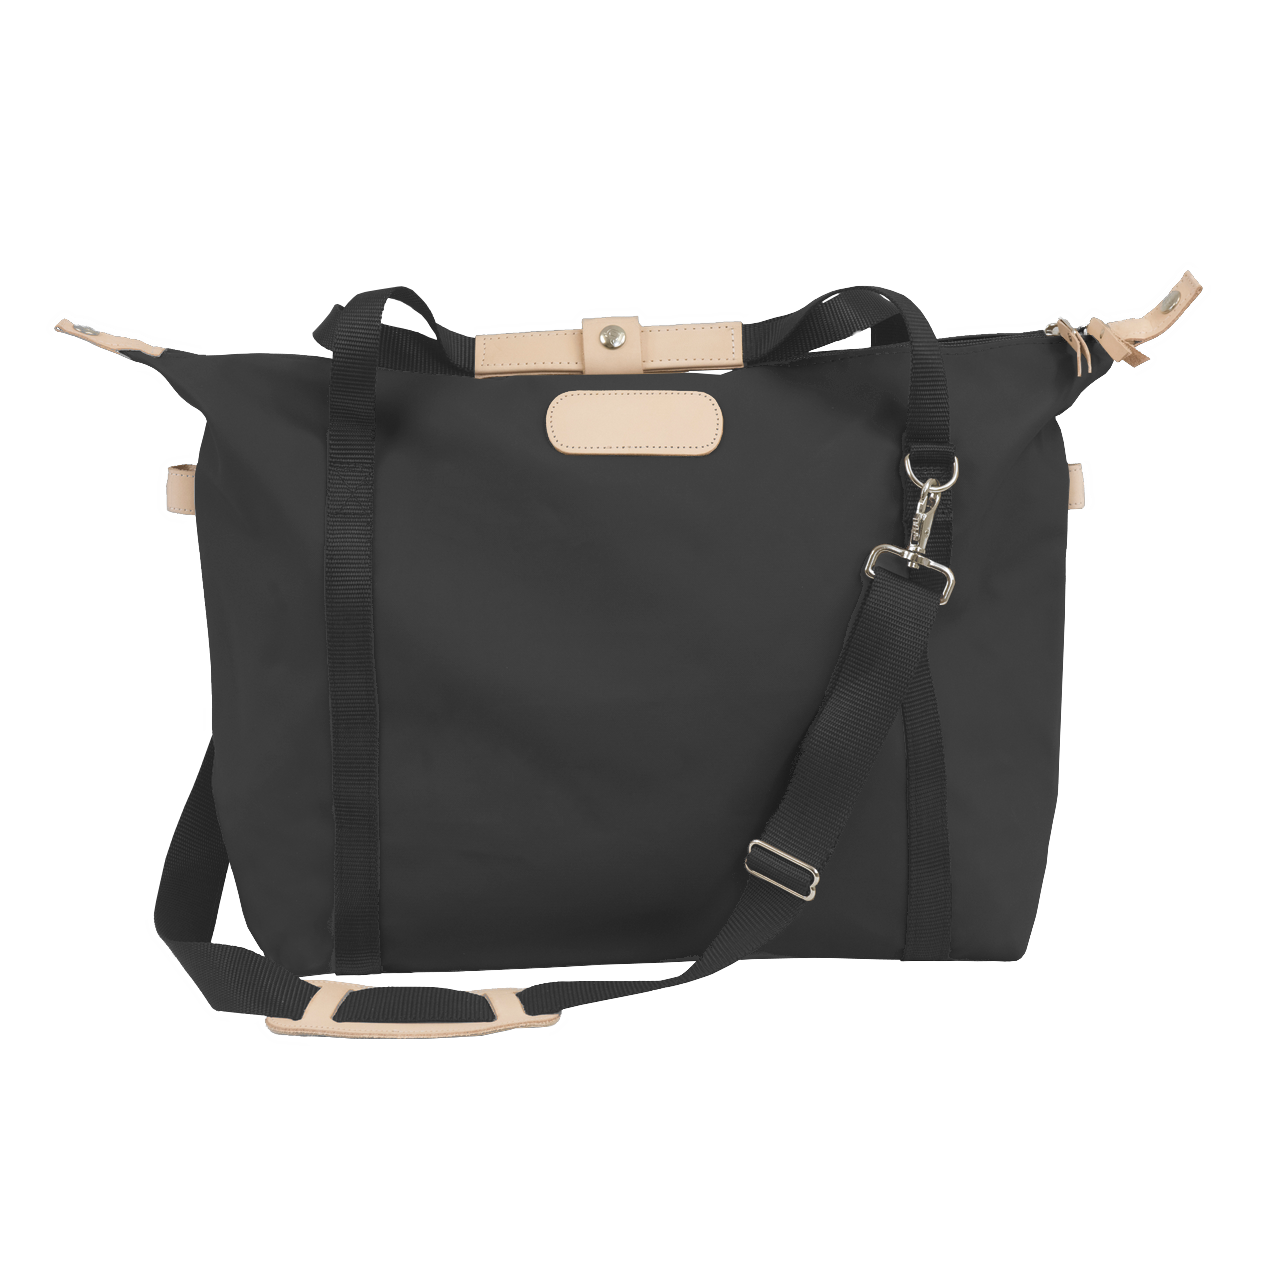 Daytripper - Charcoal Coated Canvas Front Angle in Color 'Charcoal Coated Canvas'